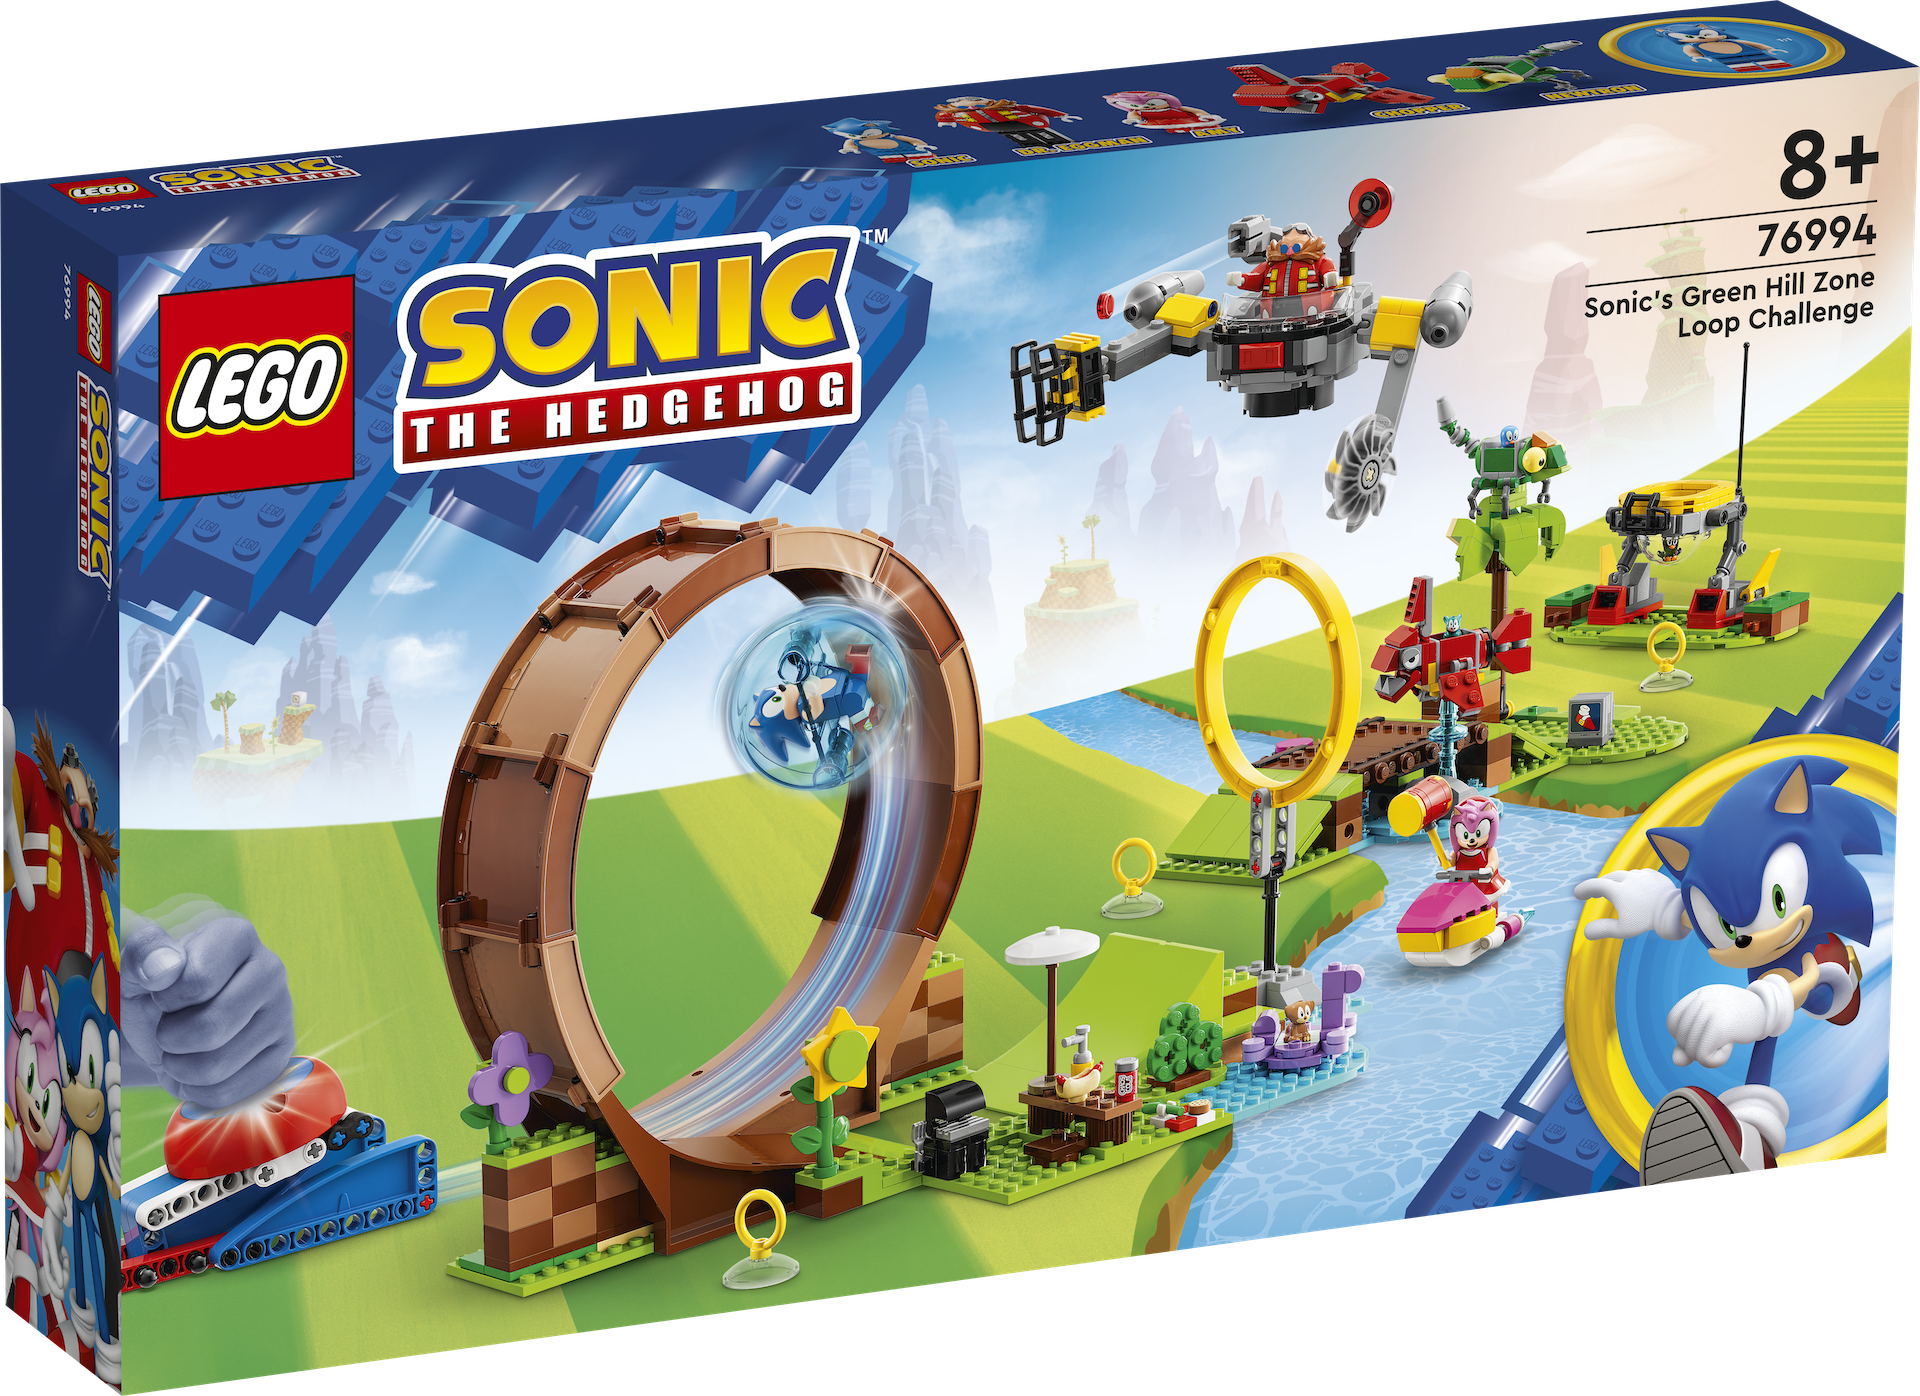 ▻ New LEGO Sonic The Hedgehog sets are online on the Shop - HOTH BRICKS